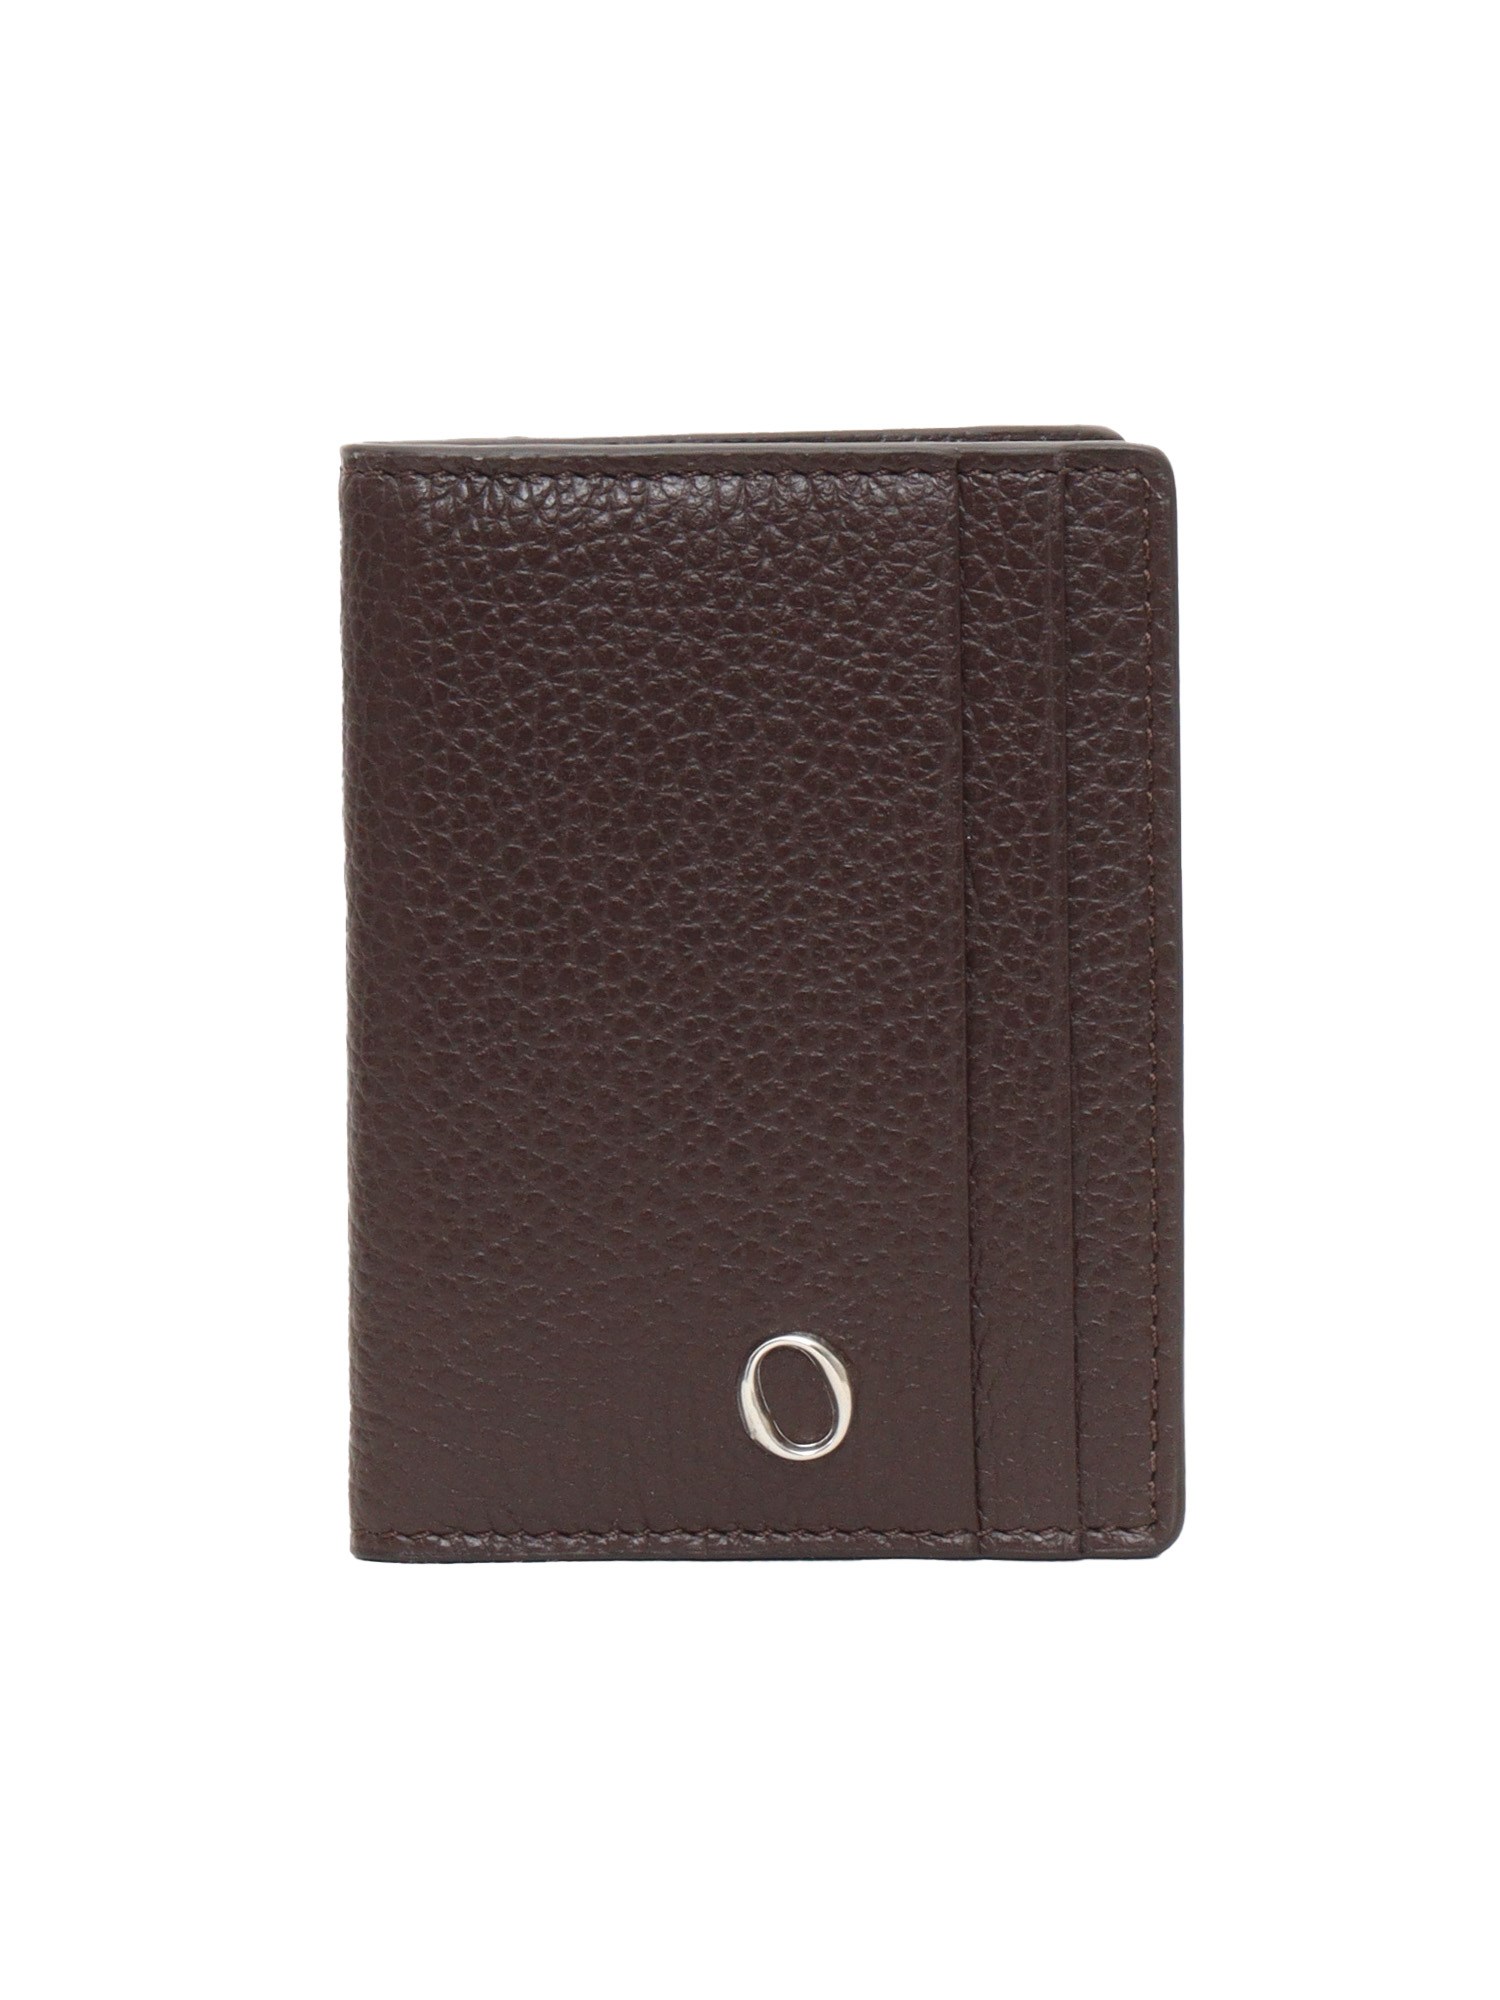 Orciani Brown Wallet